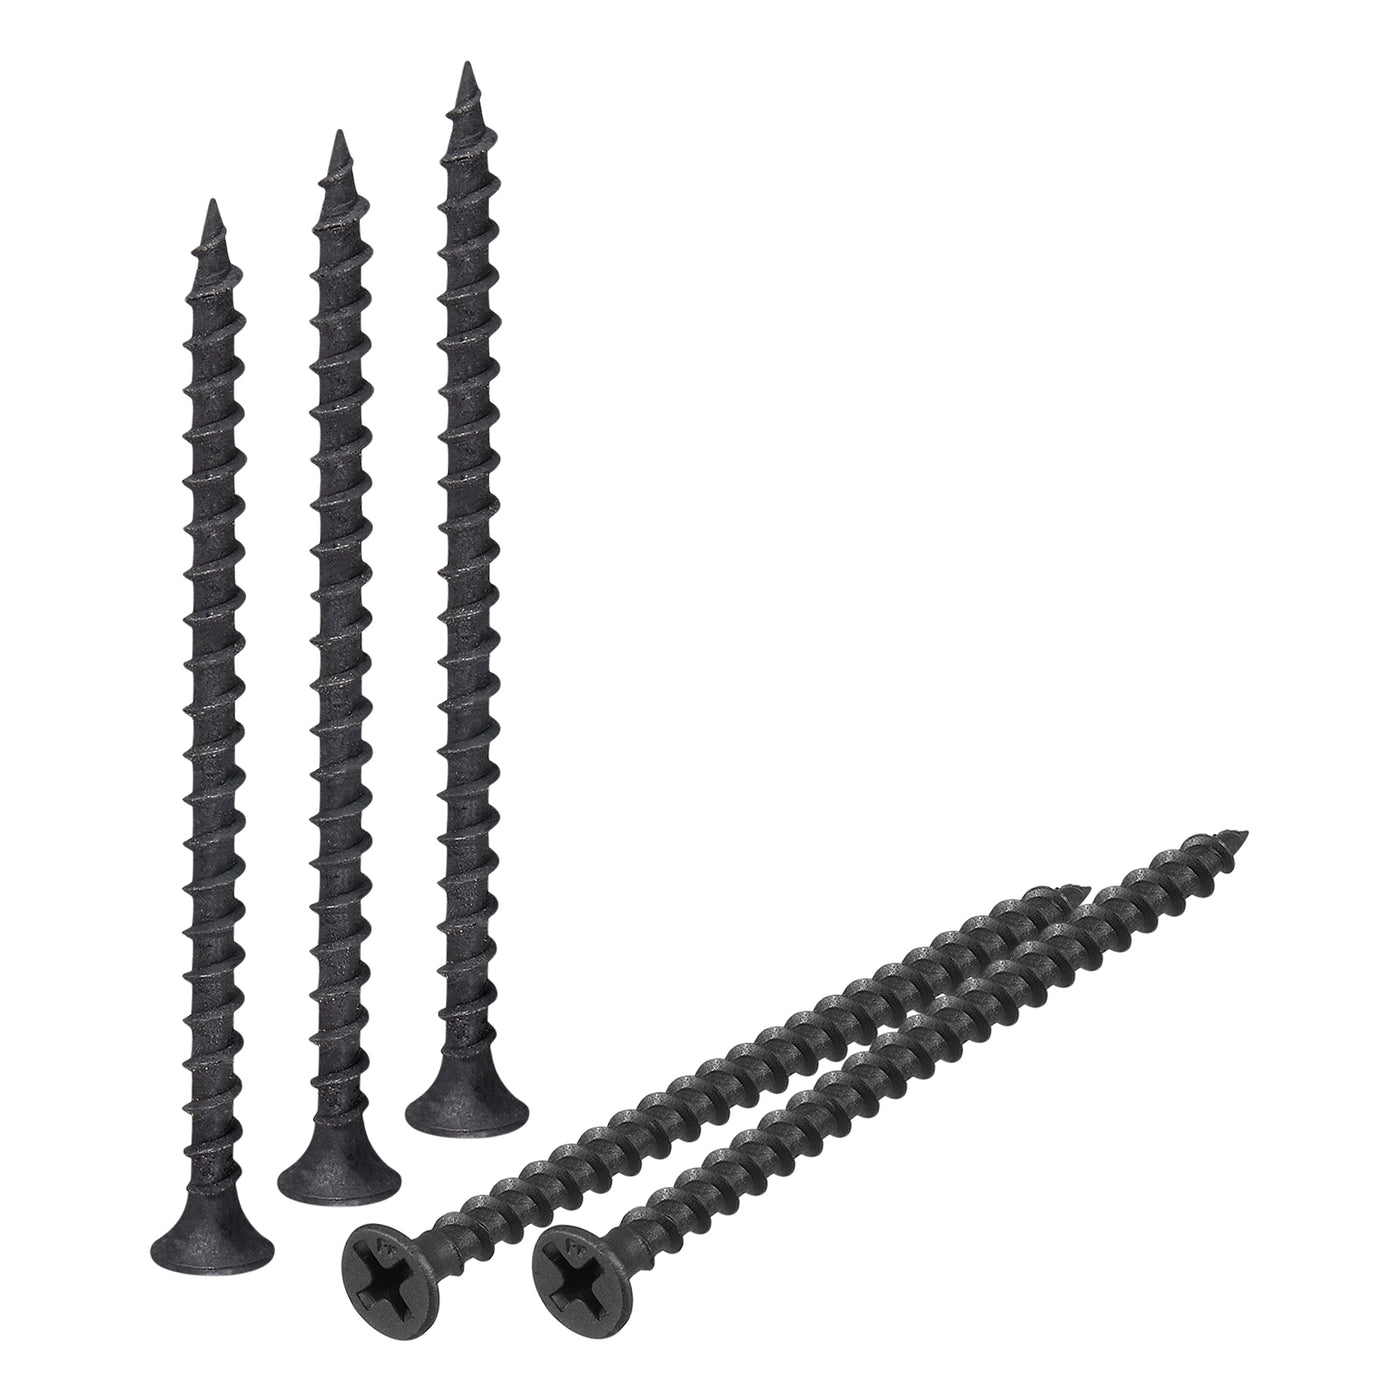 uxcell Uxcell M3.8x70mm 150pcs Phillips Drive Wood Screws, Carbon Steel Self Tapping Screws